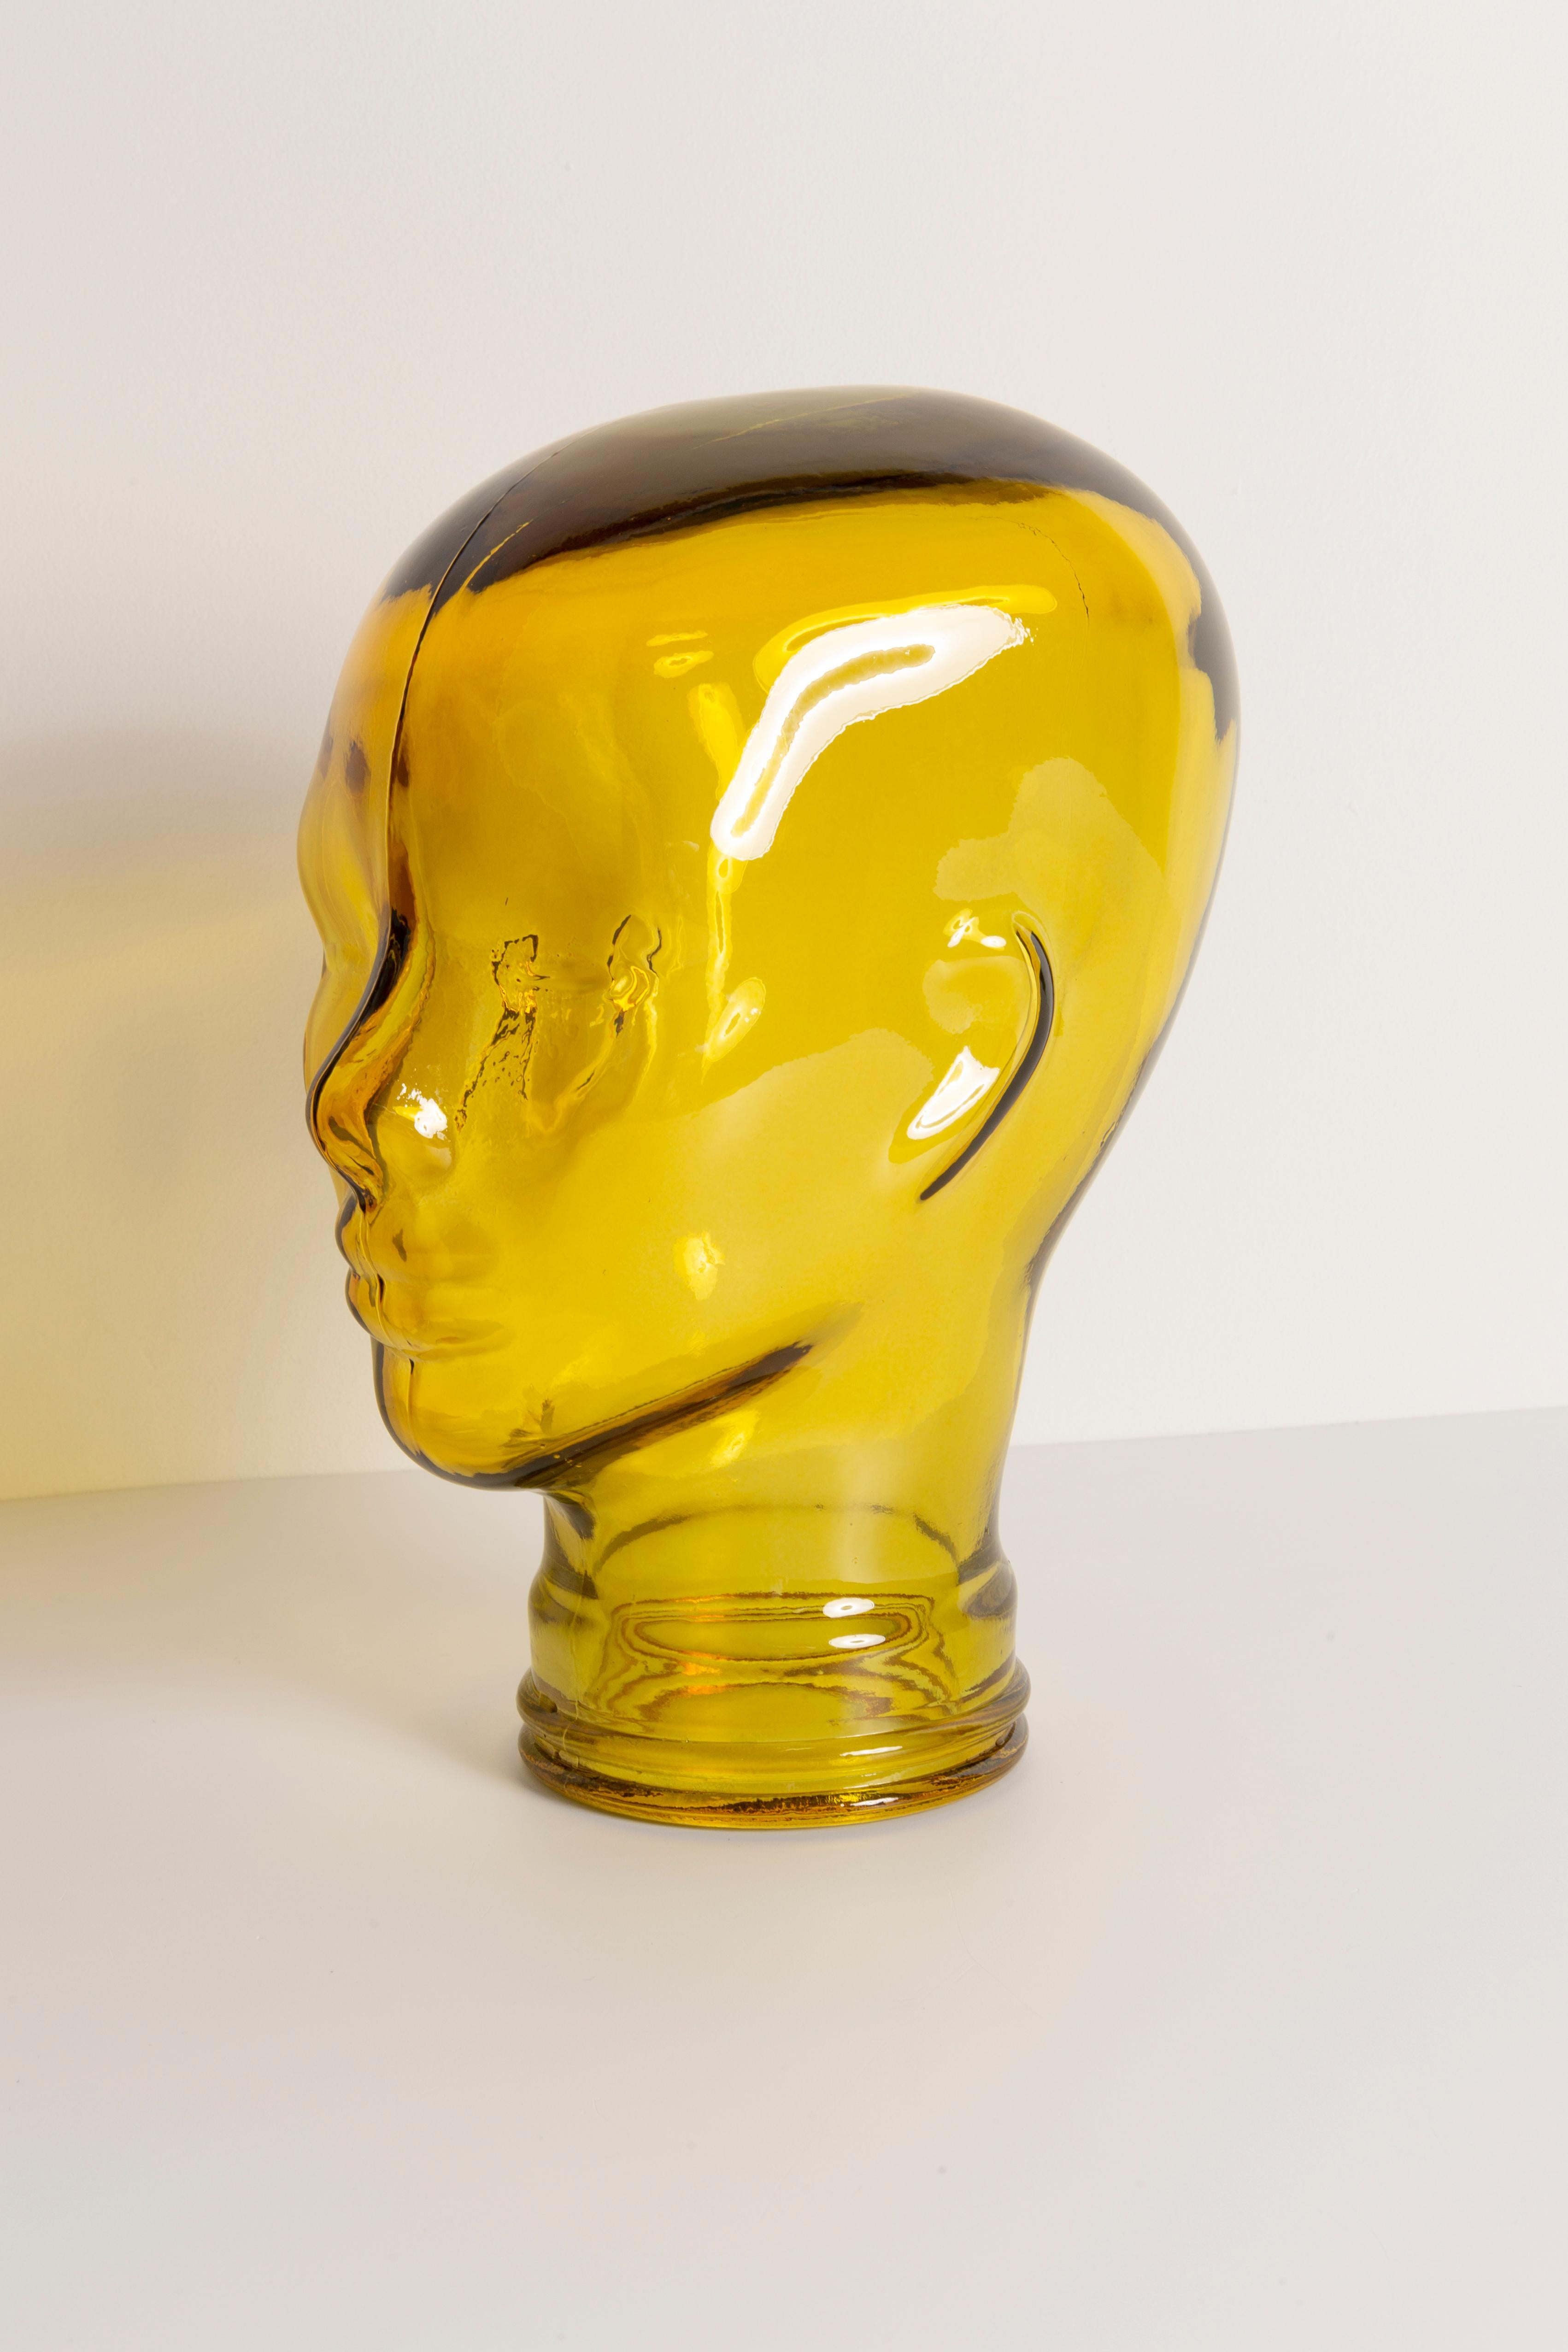 Yellow Vintage Decorative Mannequin Glass Head Sculpture, 1970s, Germany For Sale 3